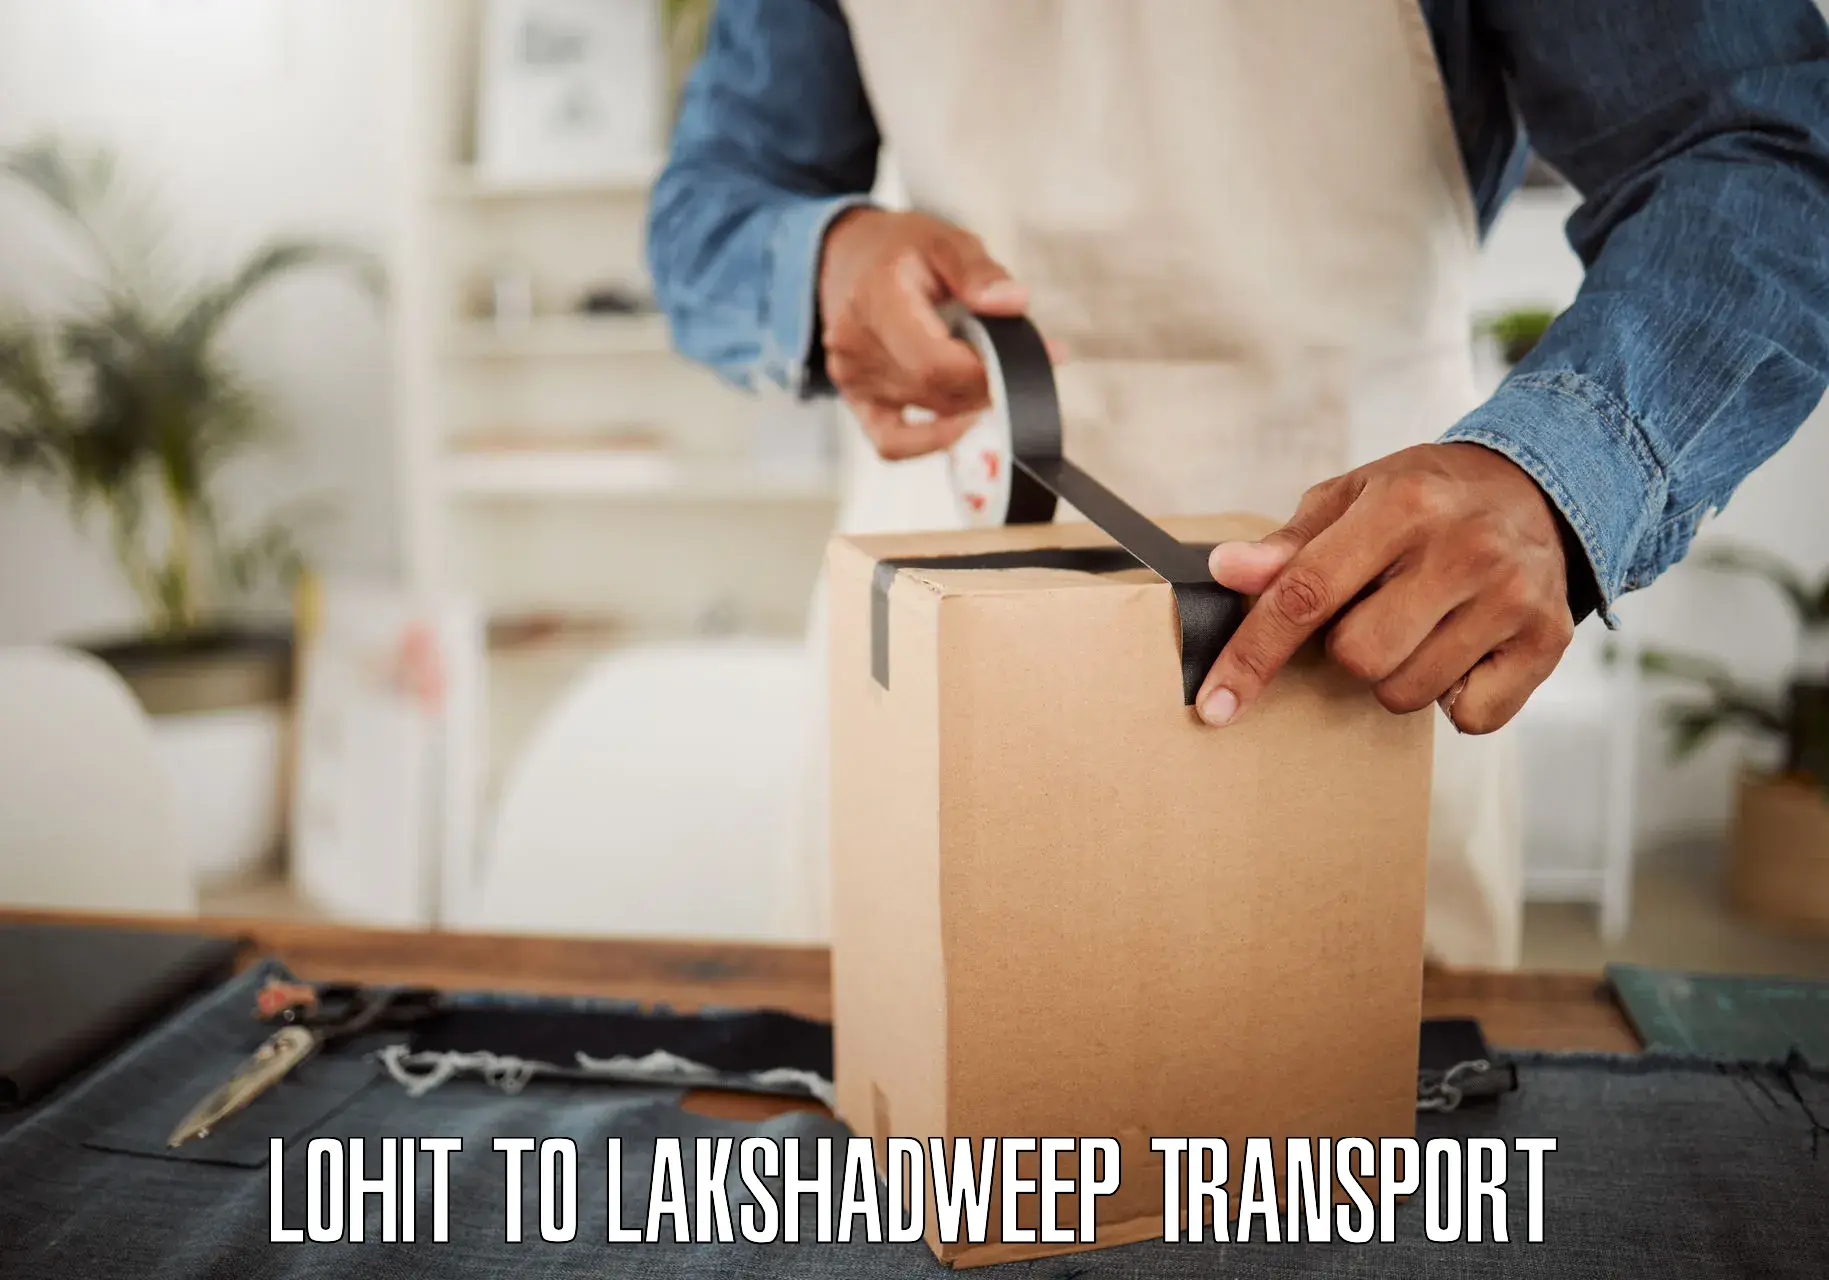 Daily transport service Lohit to Lakshadweep